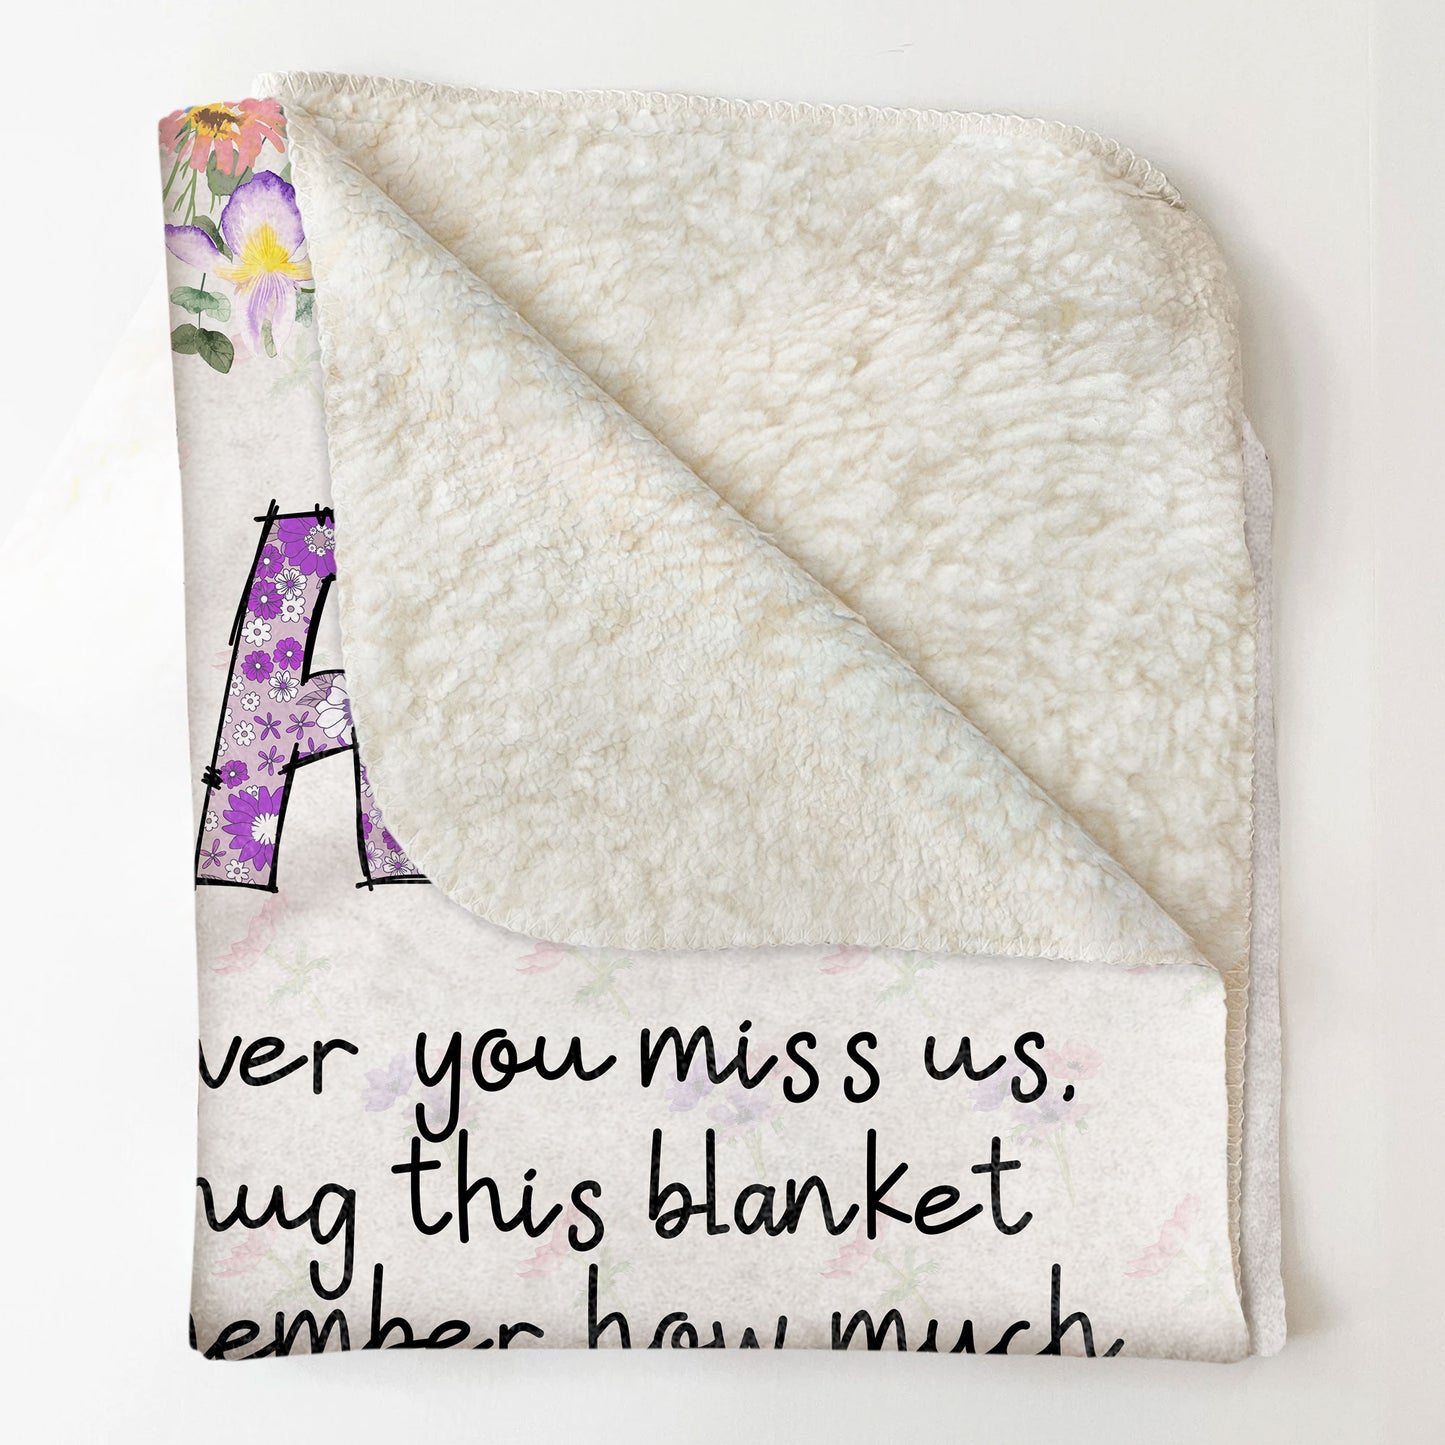 Nana, Whenever You Miss Us - Personalized Blanket